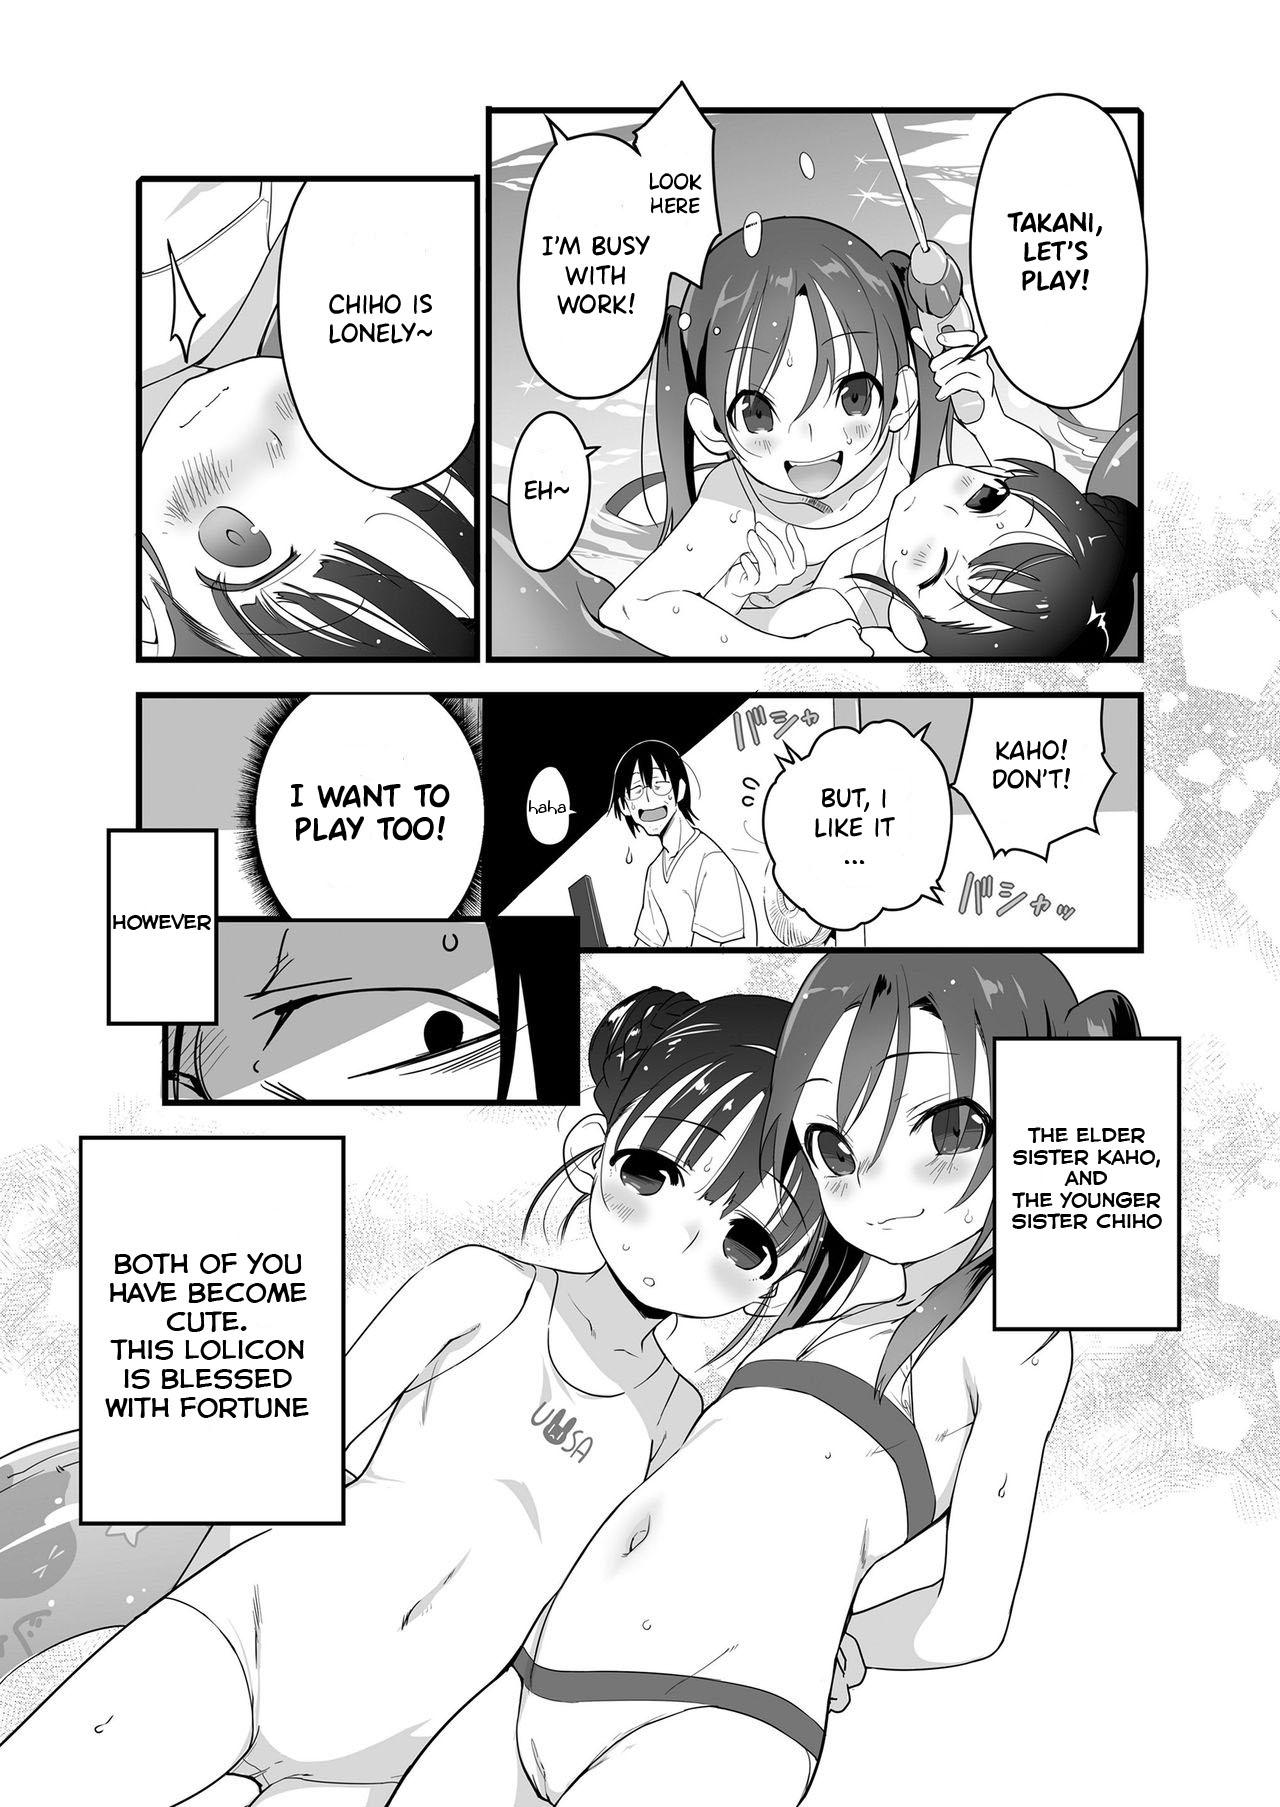 Lezdom Uchiage Hanabi, Ane to Miruka? Imouto to Miruka? | Fireworks, Should we see it with the elder sister or the younger sister? Gay Bukkake - Page 3